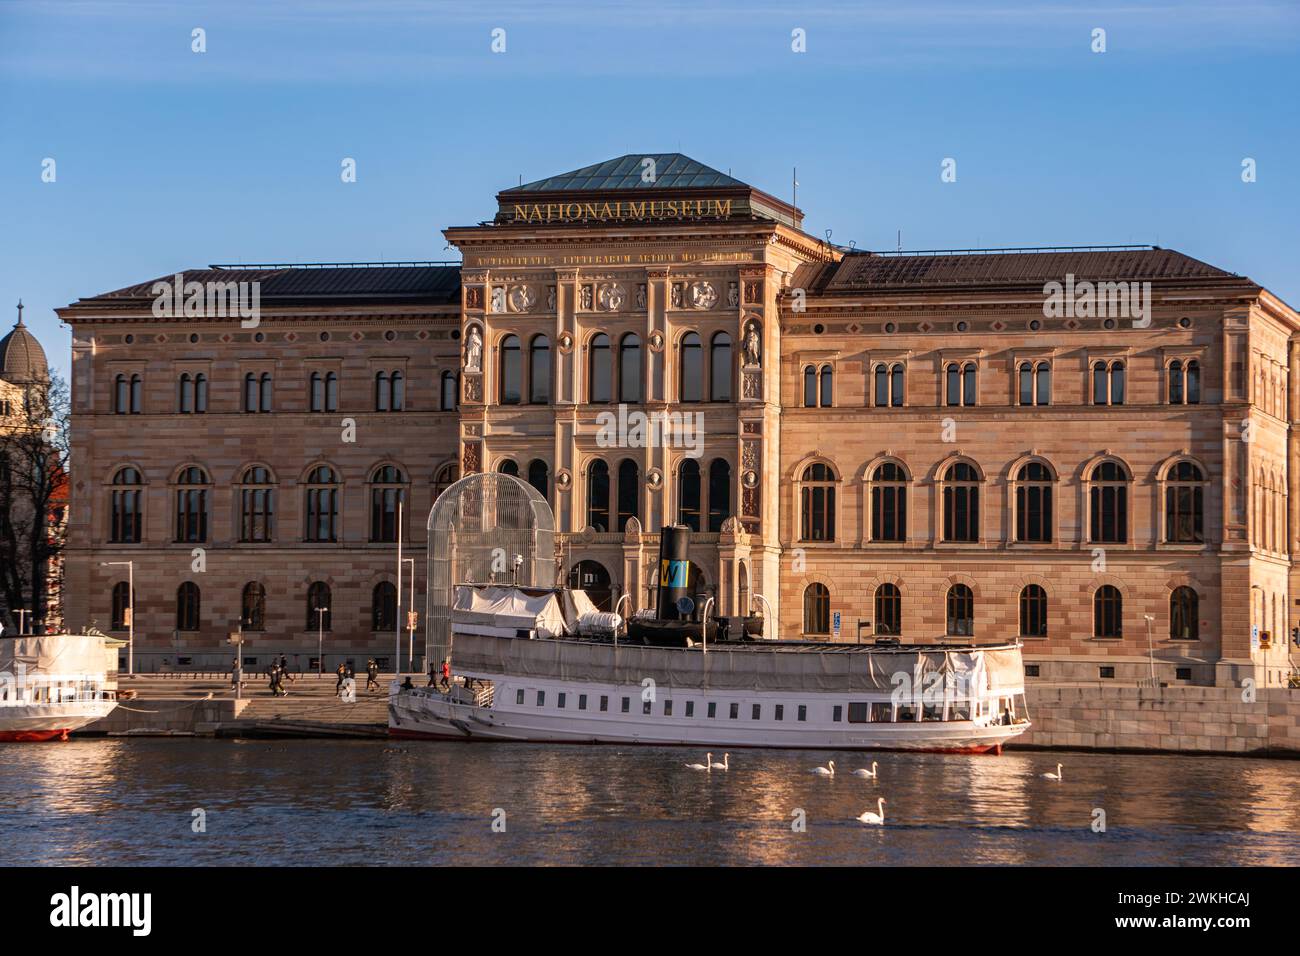 The national museum of Sweden, Stockholm. Bright sunlight, blue sky, passenger ferry, swans, a waterway and winter. Stock Photo